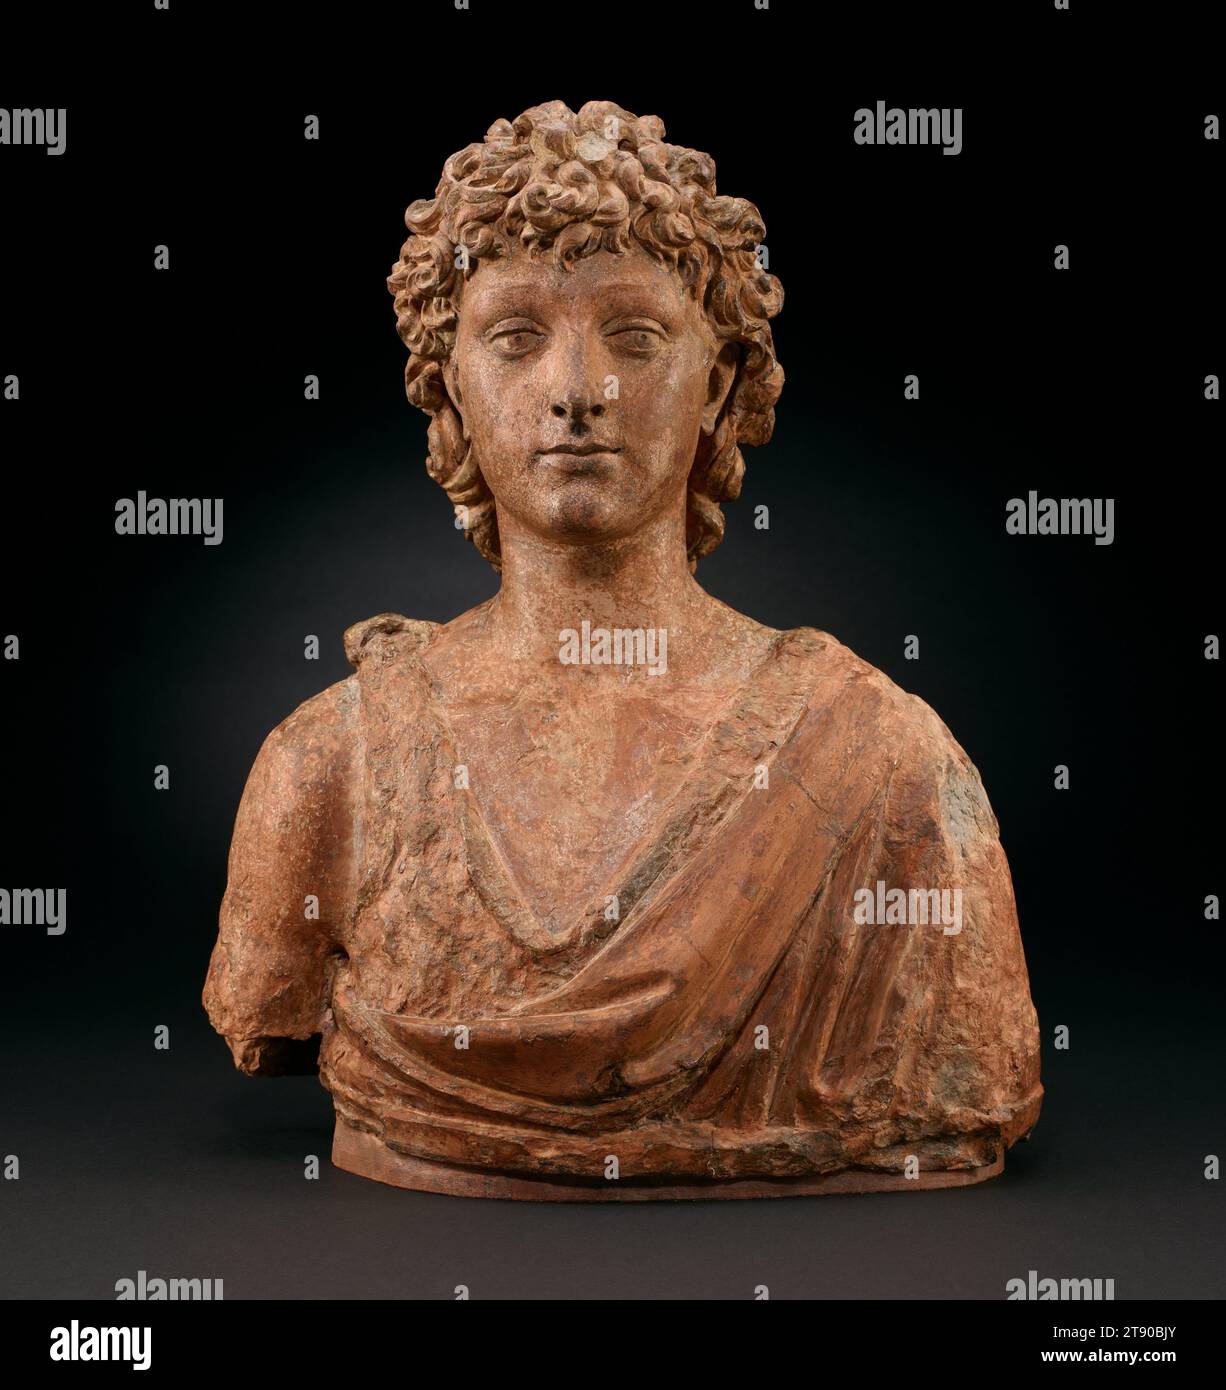 Saint John the Baptist, c. 1505, Benedetto da Rovezzano, Italian, c. 1474–1552, 19 11/16 x 16 1/4 x 8 3/4 in. (50 x 41.28 x 22.23 cm), Terra cotta, Italy, 16th century, During the Renaissance, busts of Saint John the Baptist as a boy were commonly displayed in Florentine homes. Saint John’s fine and innocent face and curly hair embody the ideal of youthful beauty at that time. Benedetto da Rovezzano made this bust in Florence when Leonardo da Vinci, Raphael, and Michelangelo were leading the artistic scene in town. When Michelangelo left for Rome in 1508 to paint the Sistine Chapel ceiling Stock Photo